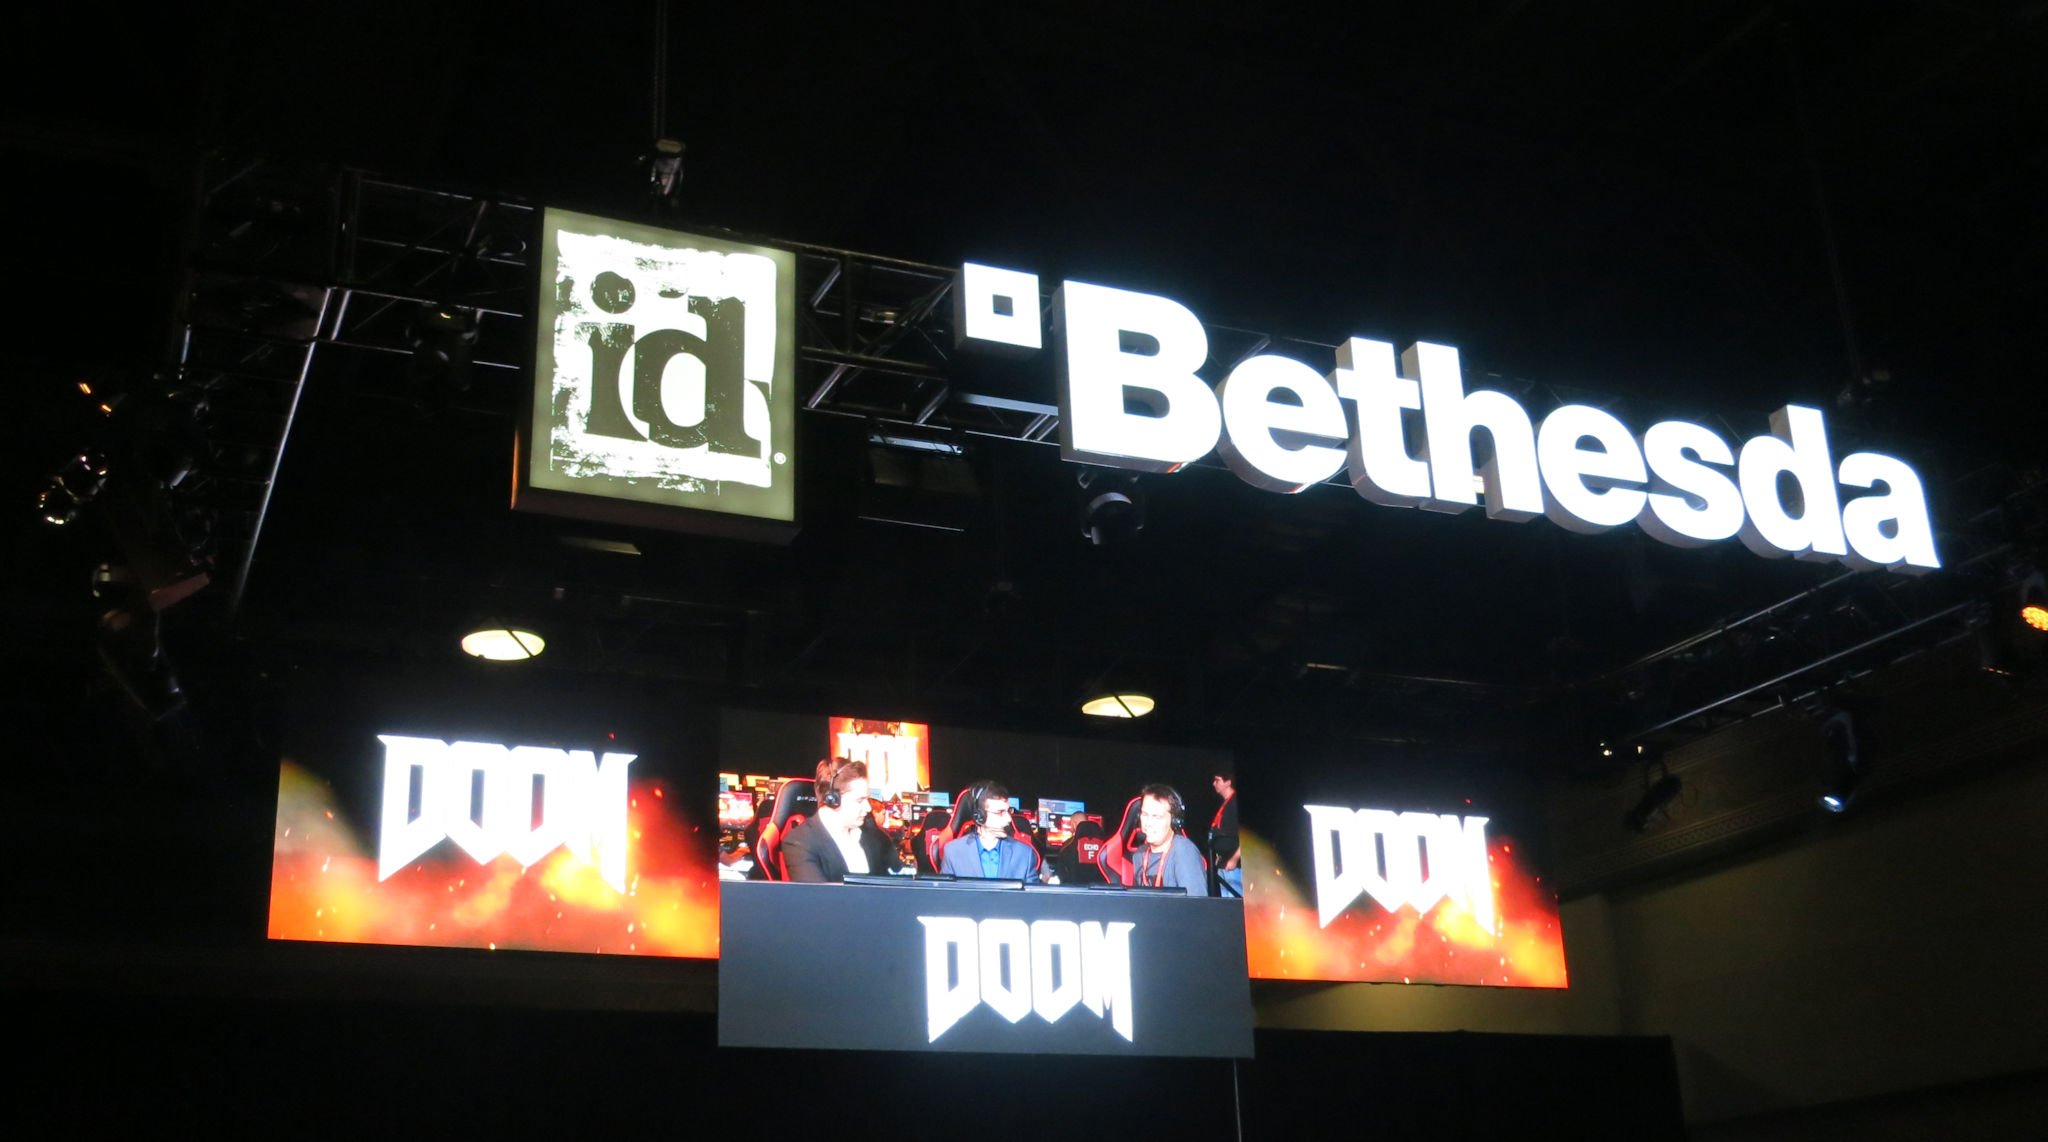 Extra-bloody DOOM multiplayer impressions from QuakeCon 2015